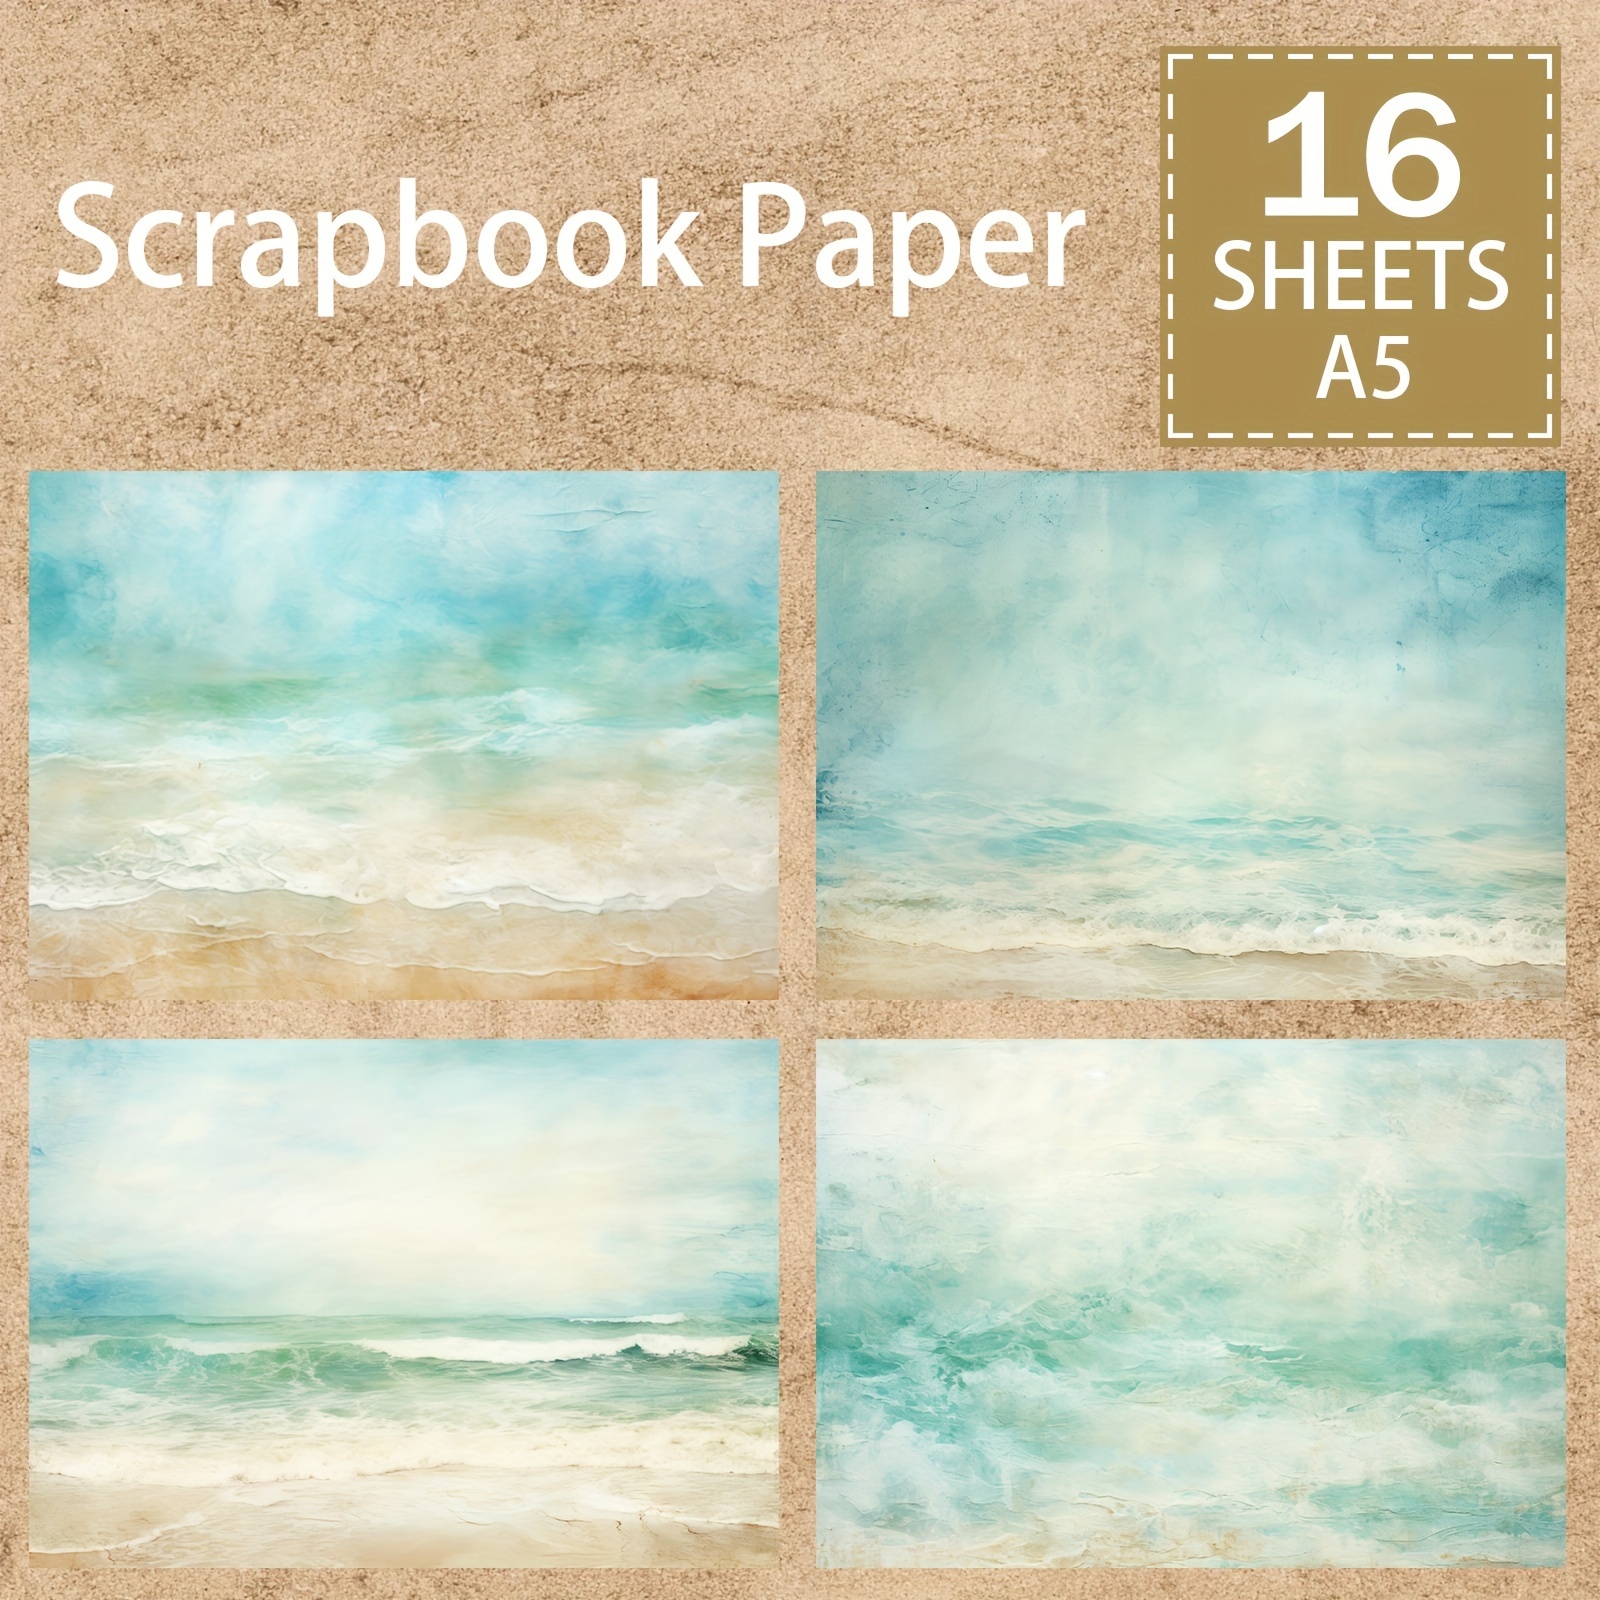 

16 Sheets A5 Vintage Ocean Beach Sky Scrapbook Paper Set - Decorative Background Cardstock For Diy Journaling, Greeting Cards, Planners, And Crafting - Premium Quality Paper Material